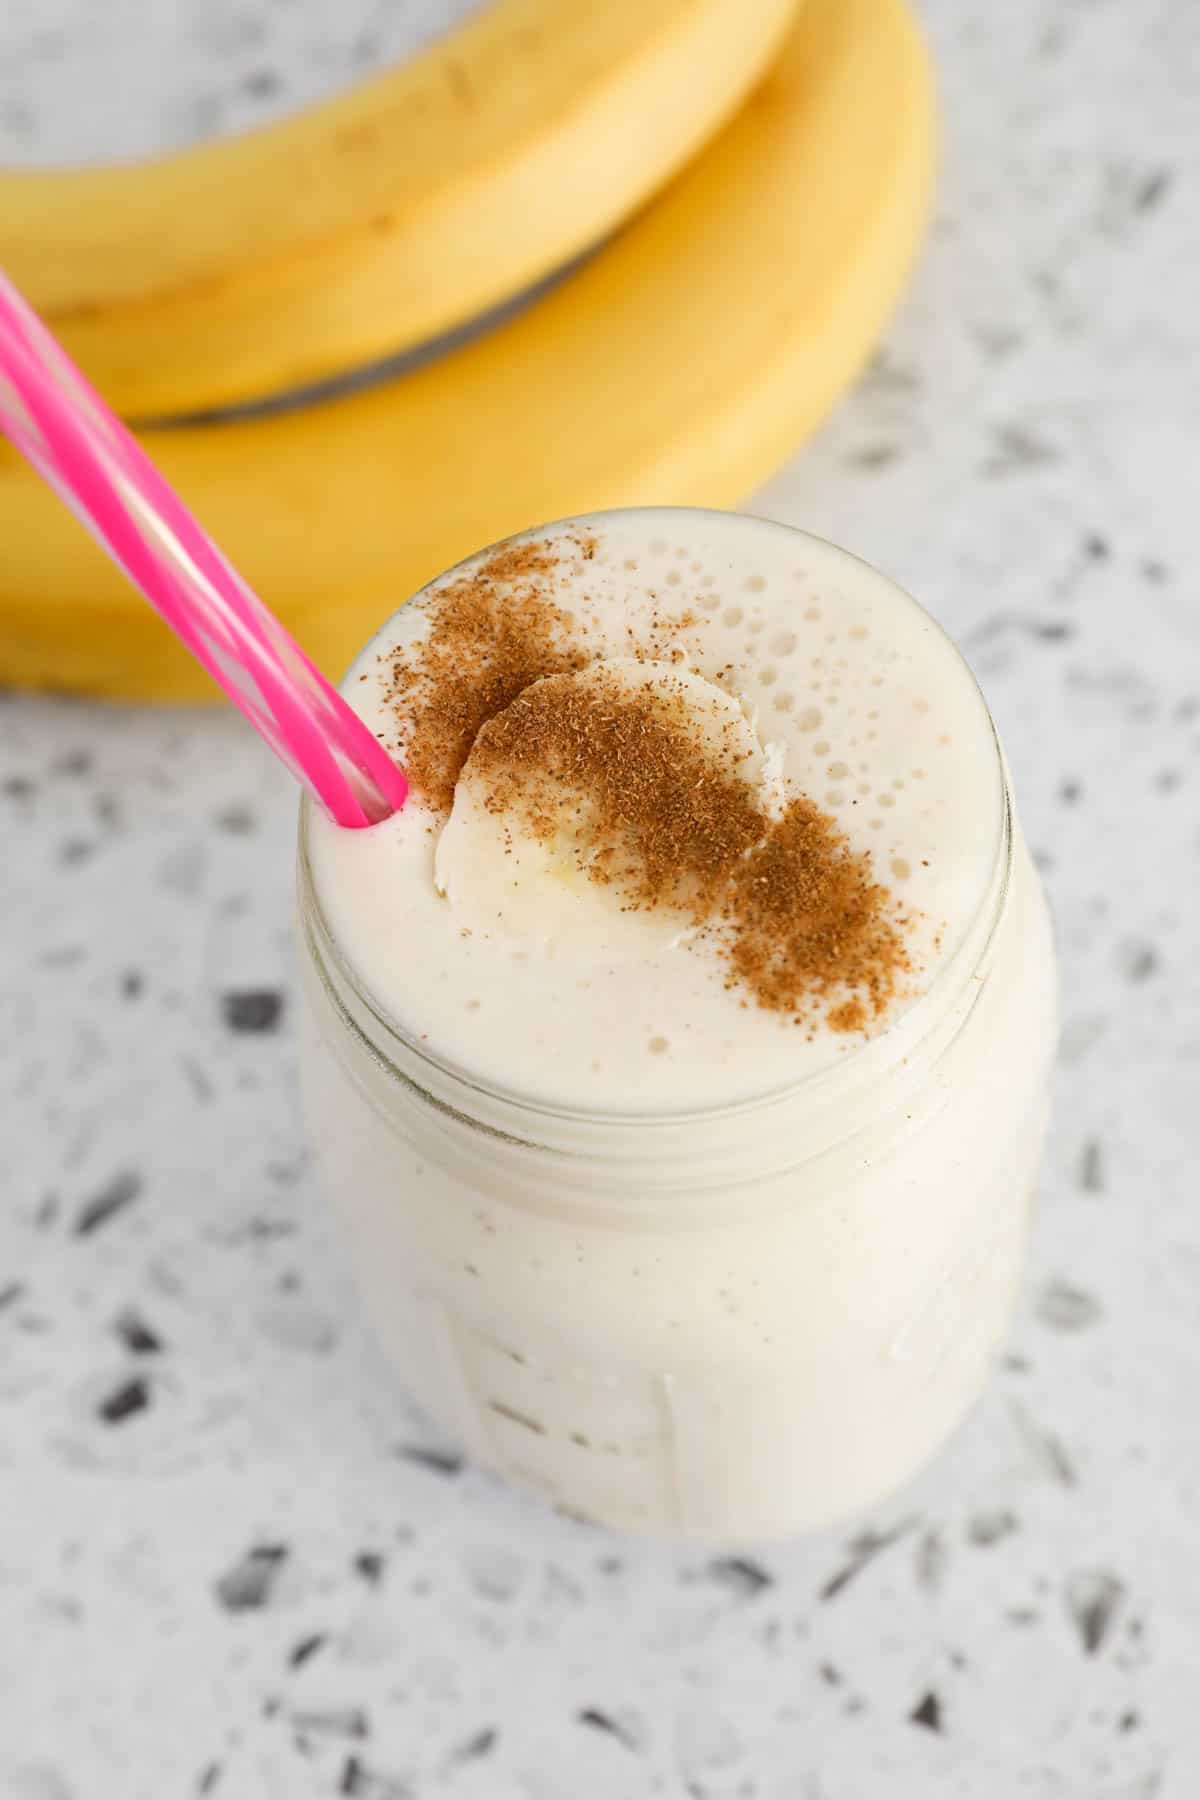 A banana smoothie in a glass jar with a straw, in front of fresh bananas.